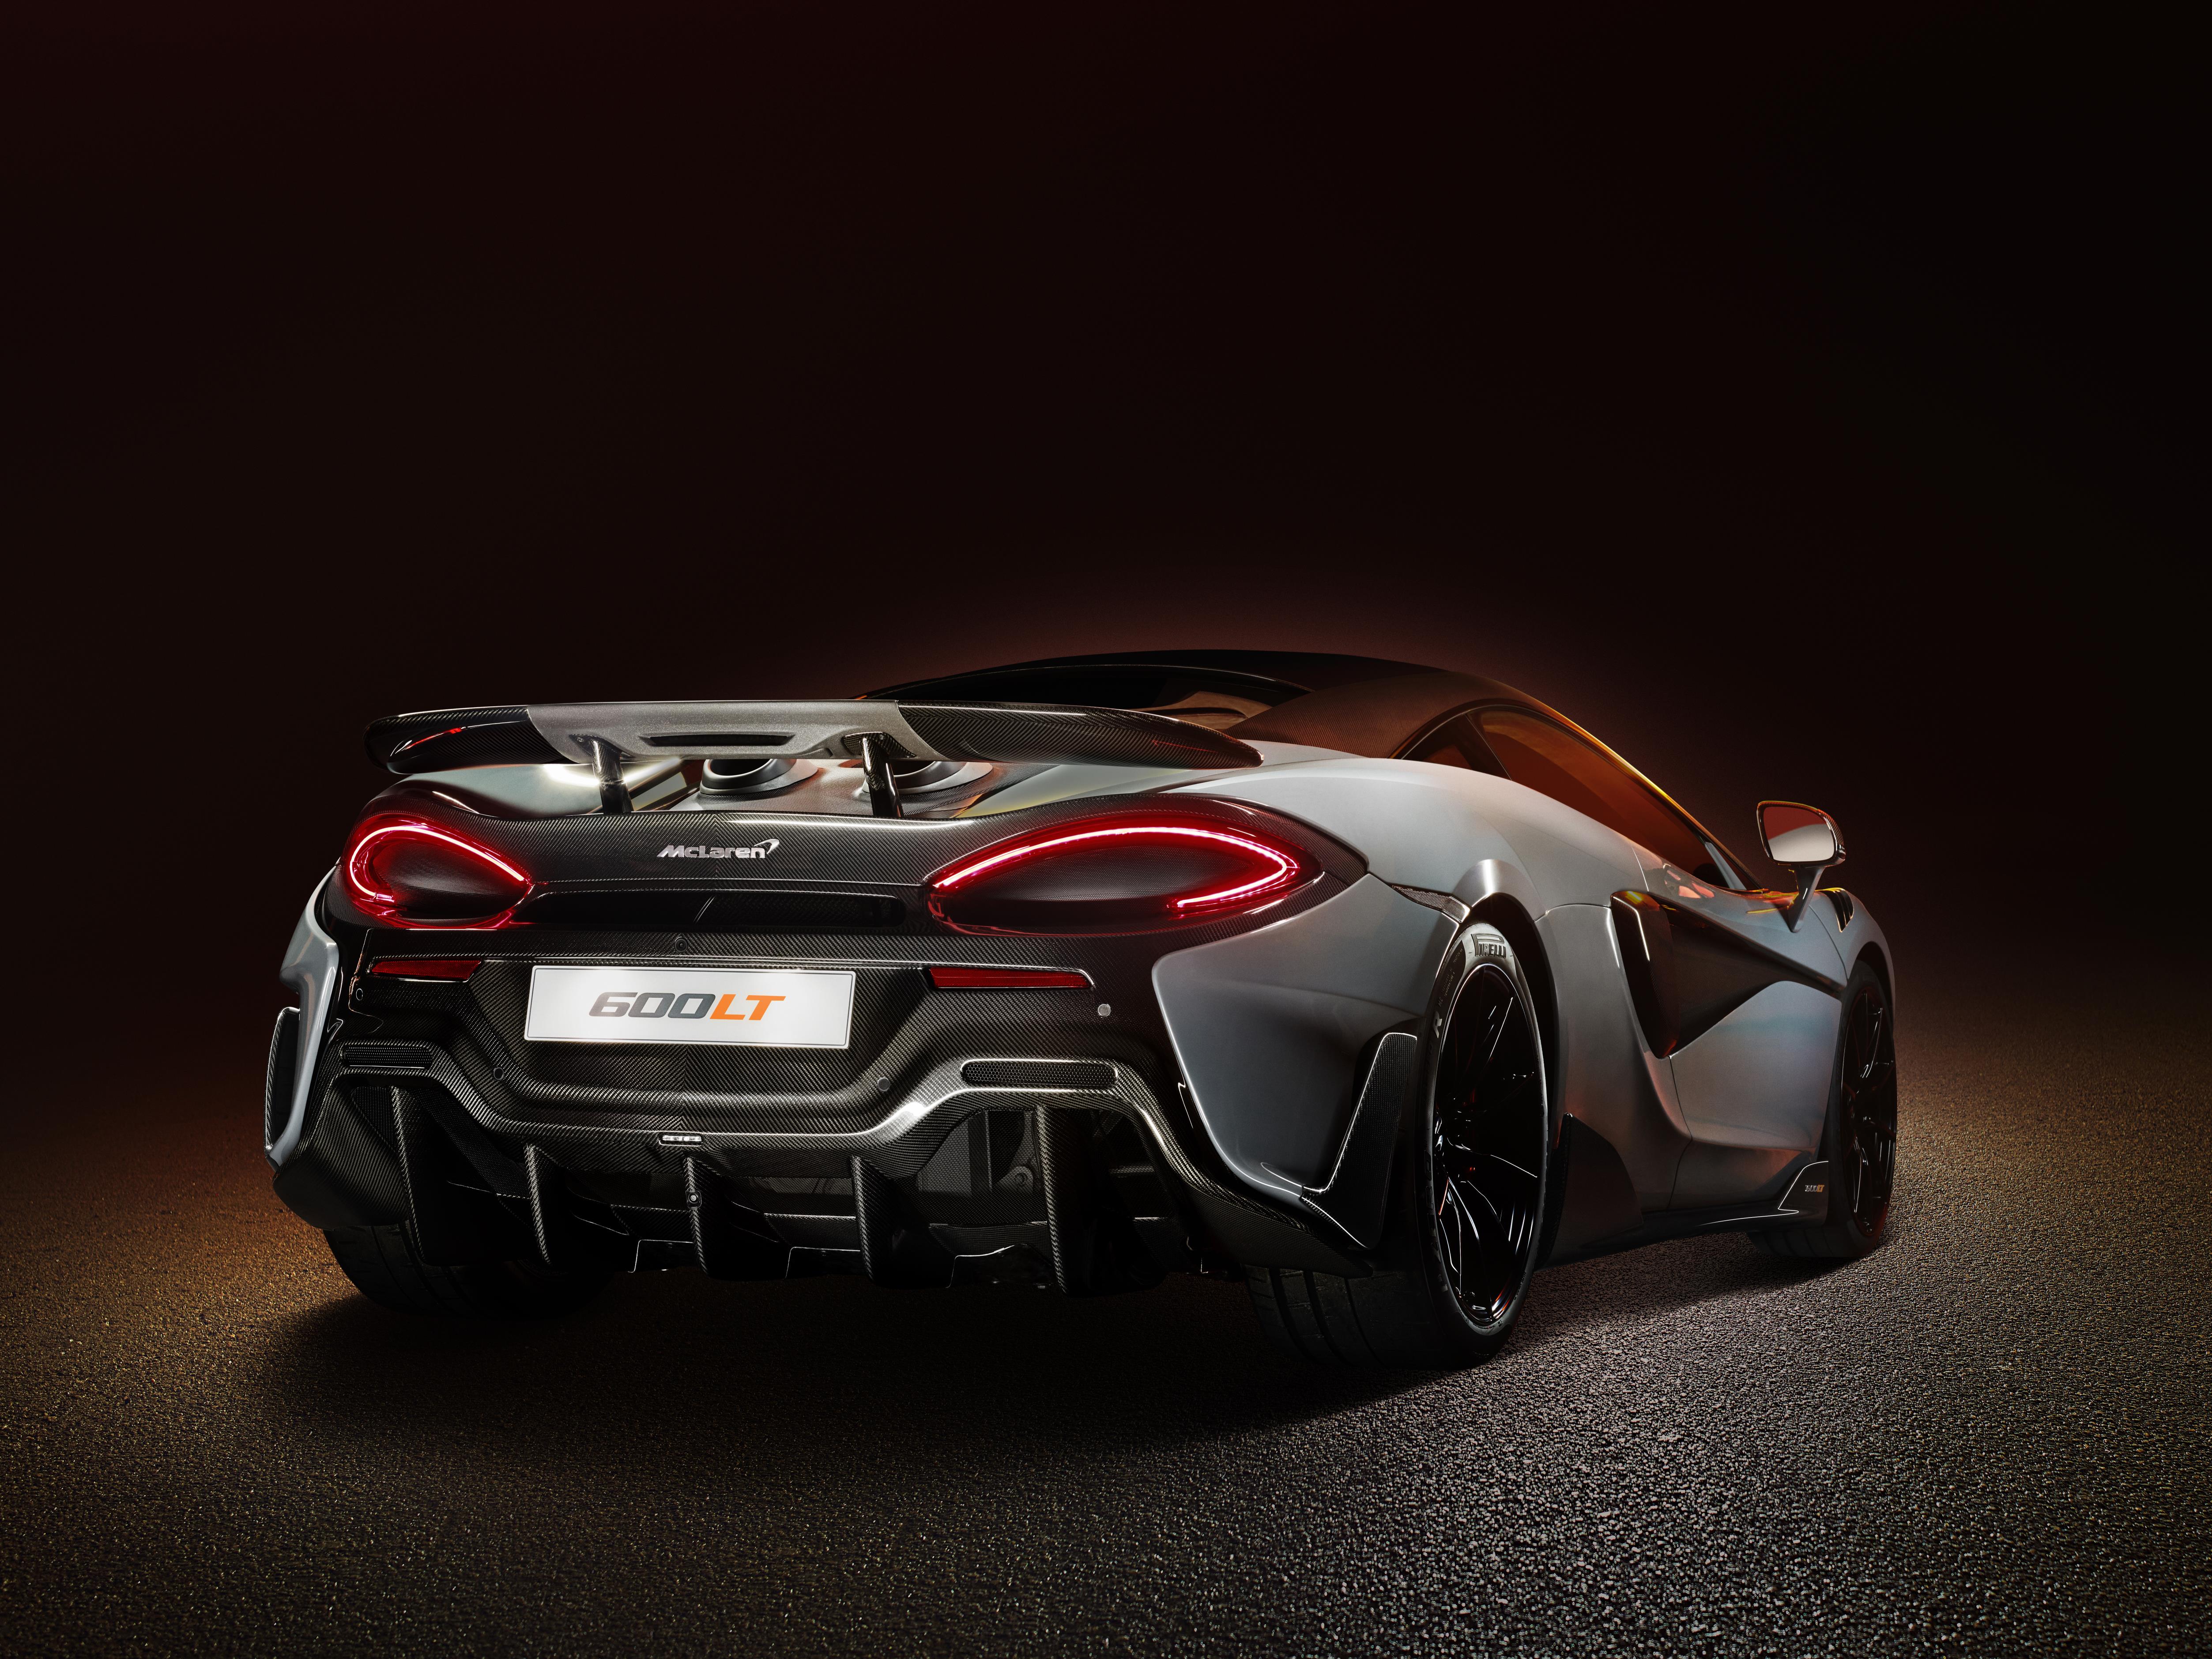 NEW: McLaren 600LT, the next chapter in Longtail history